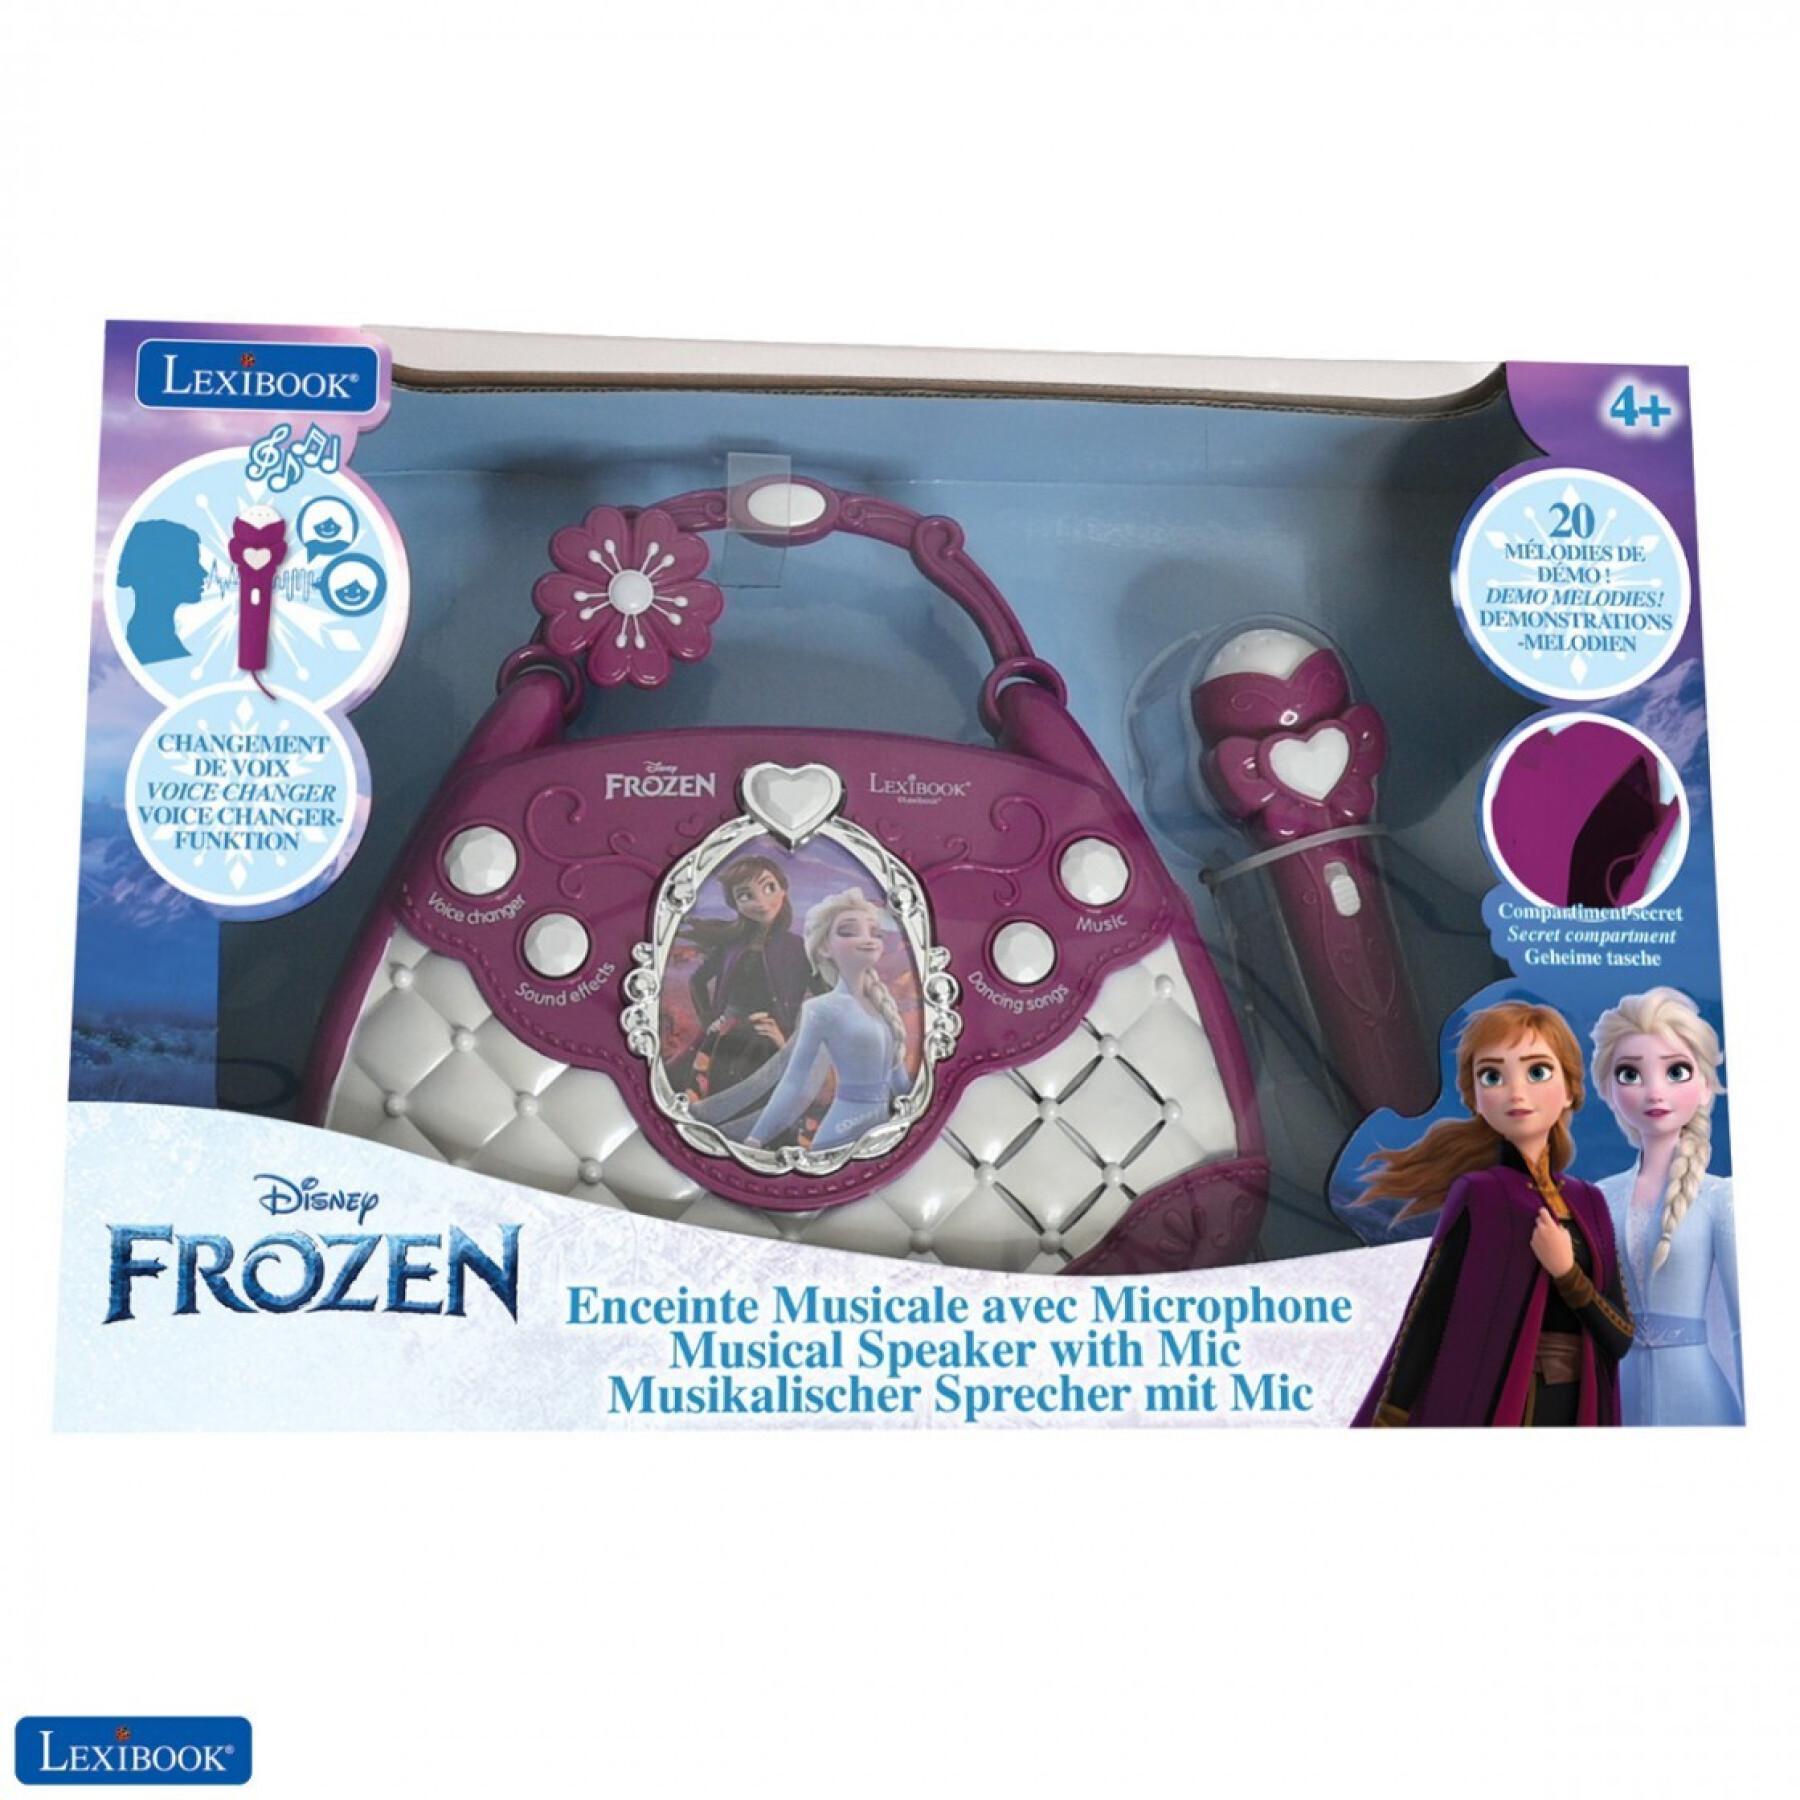 Handbag music speaker with microphone, voice changer and aux-in snow queen cable Lexibook